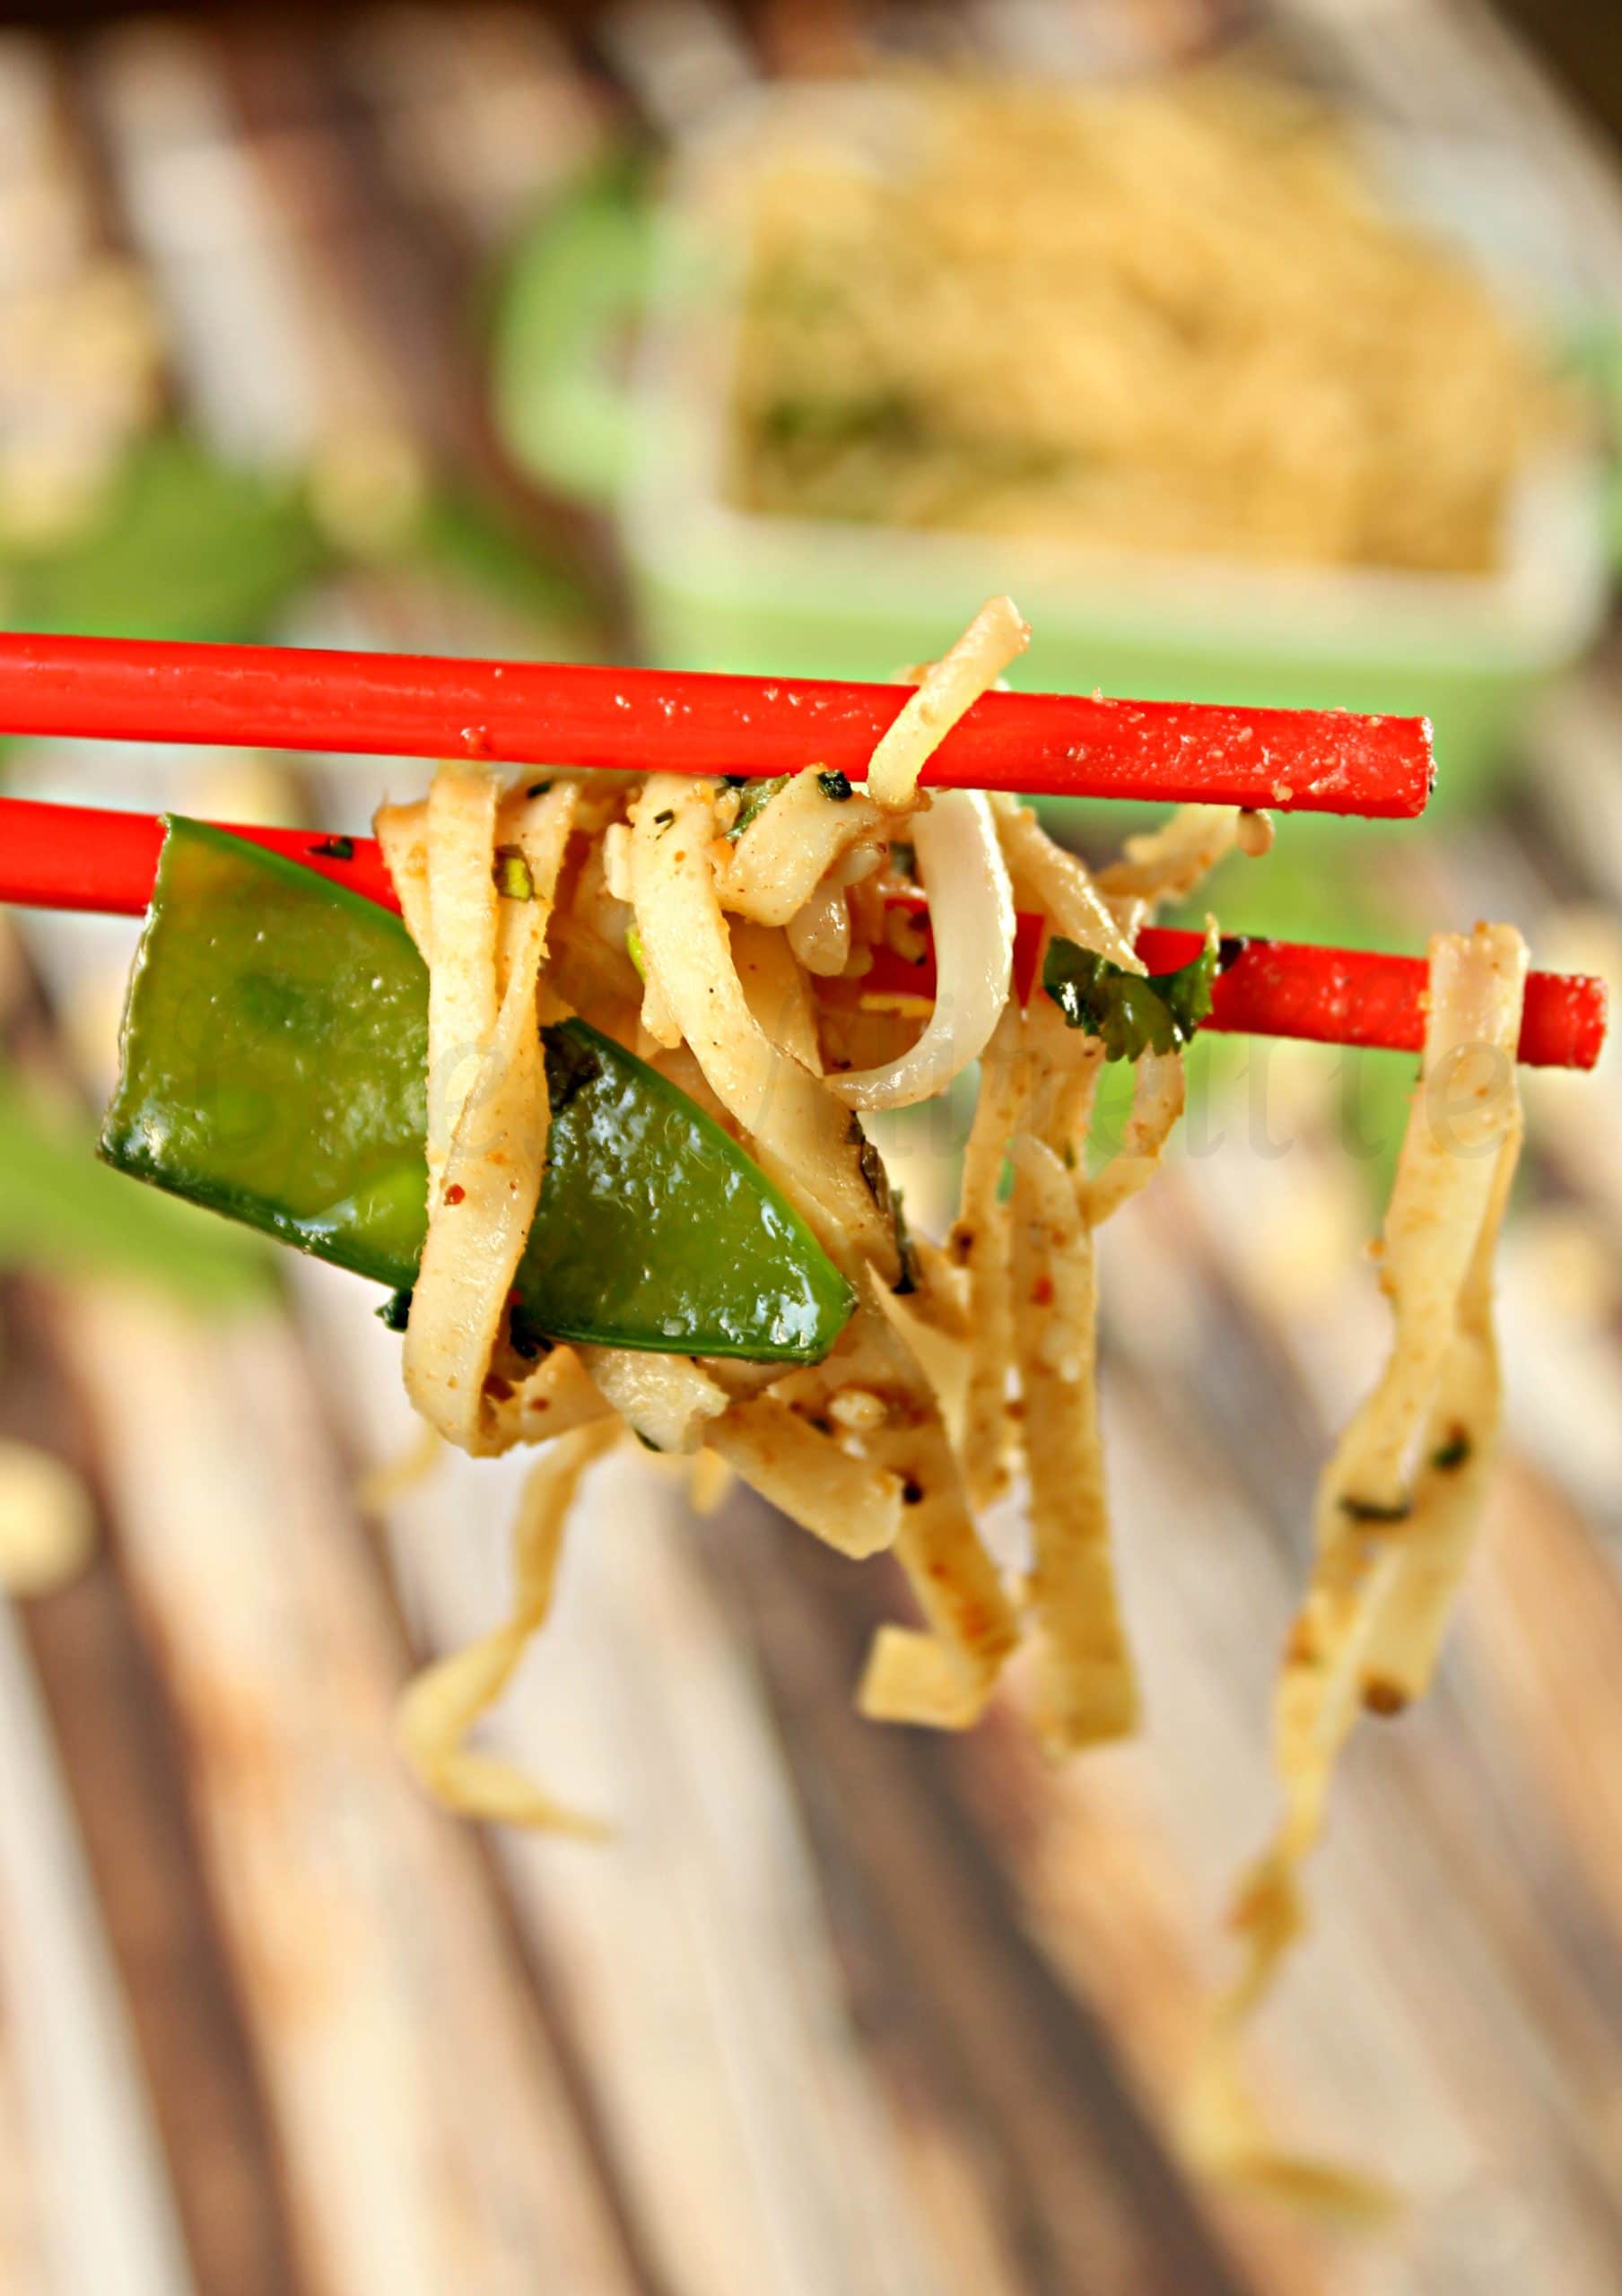 Sesame Peanut Noodles with Snow peas being held by chopsticks